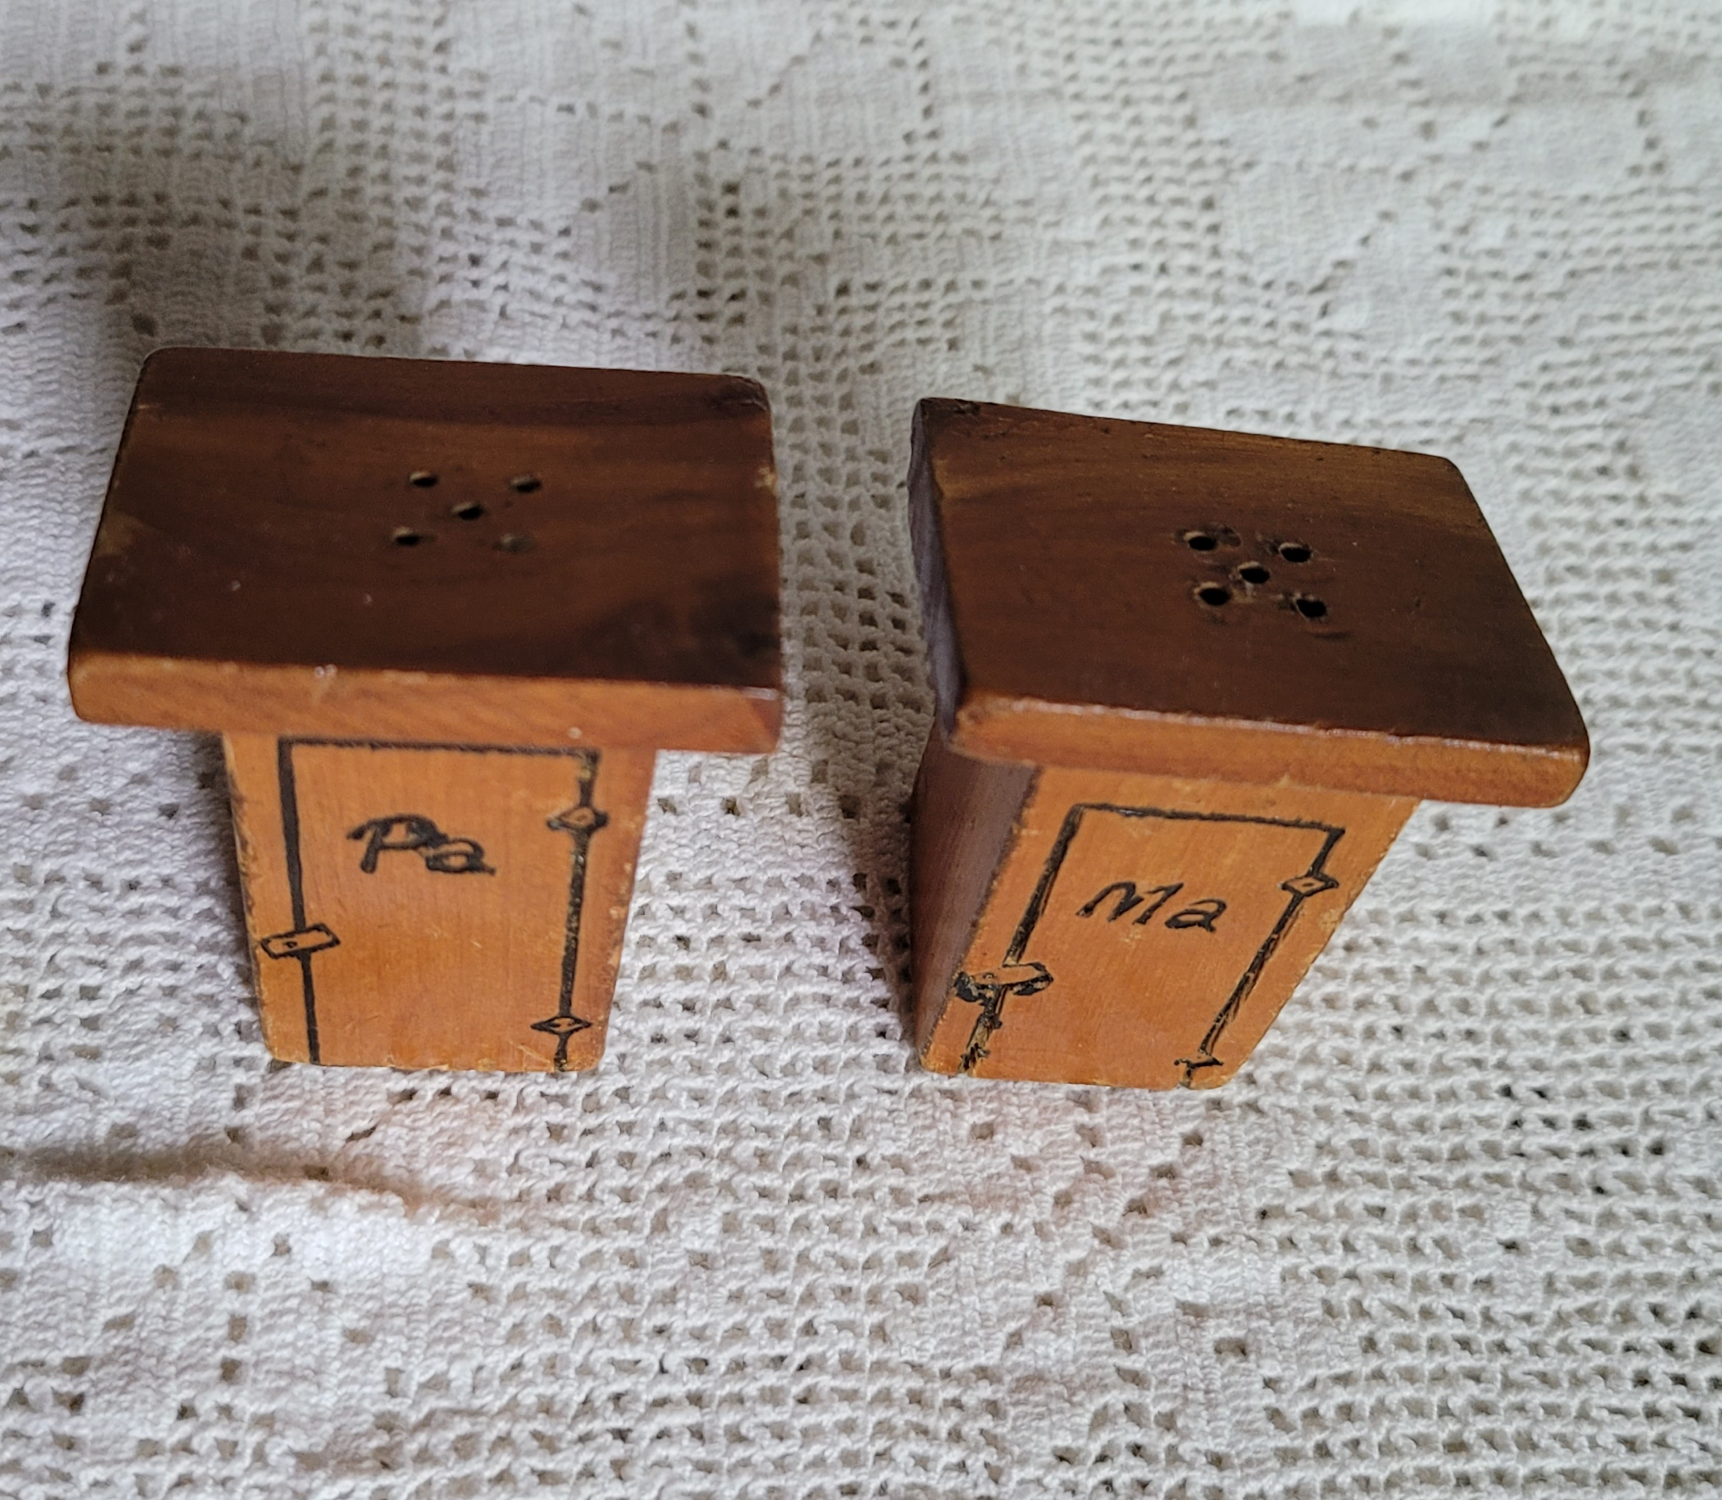 Vintage Outhouse Salt & Pepper Shakers, circa 1940